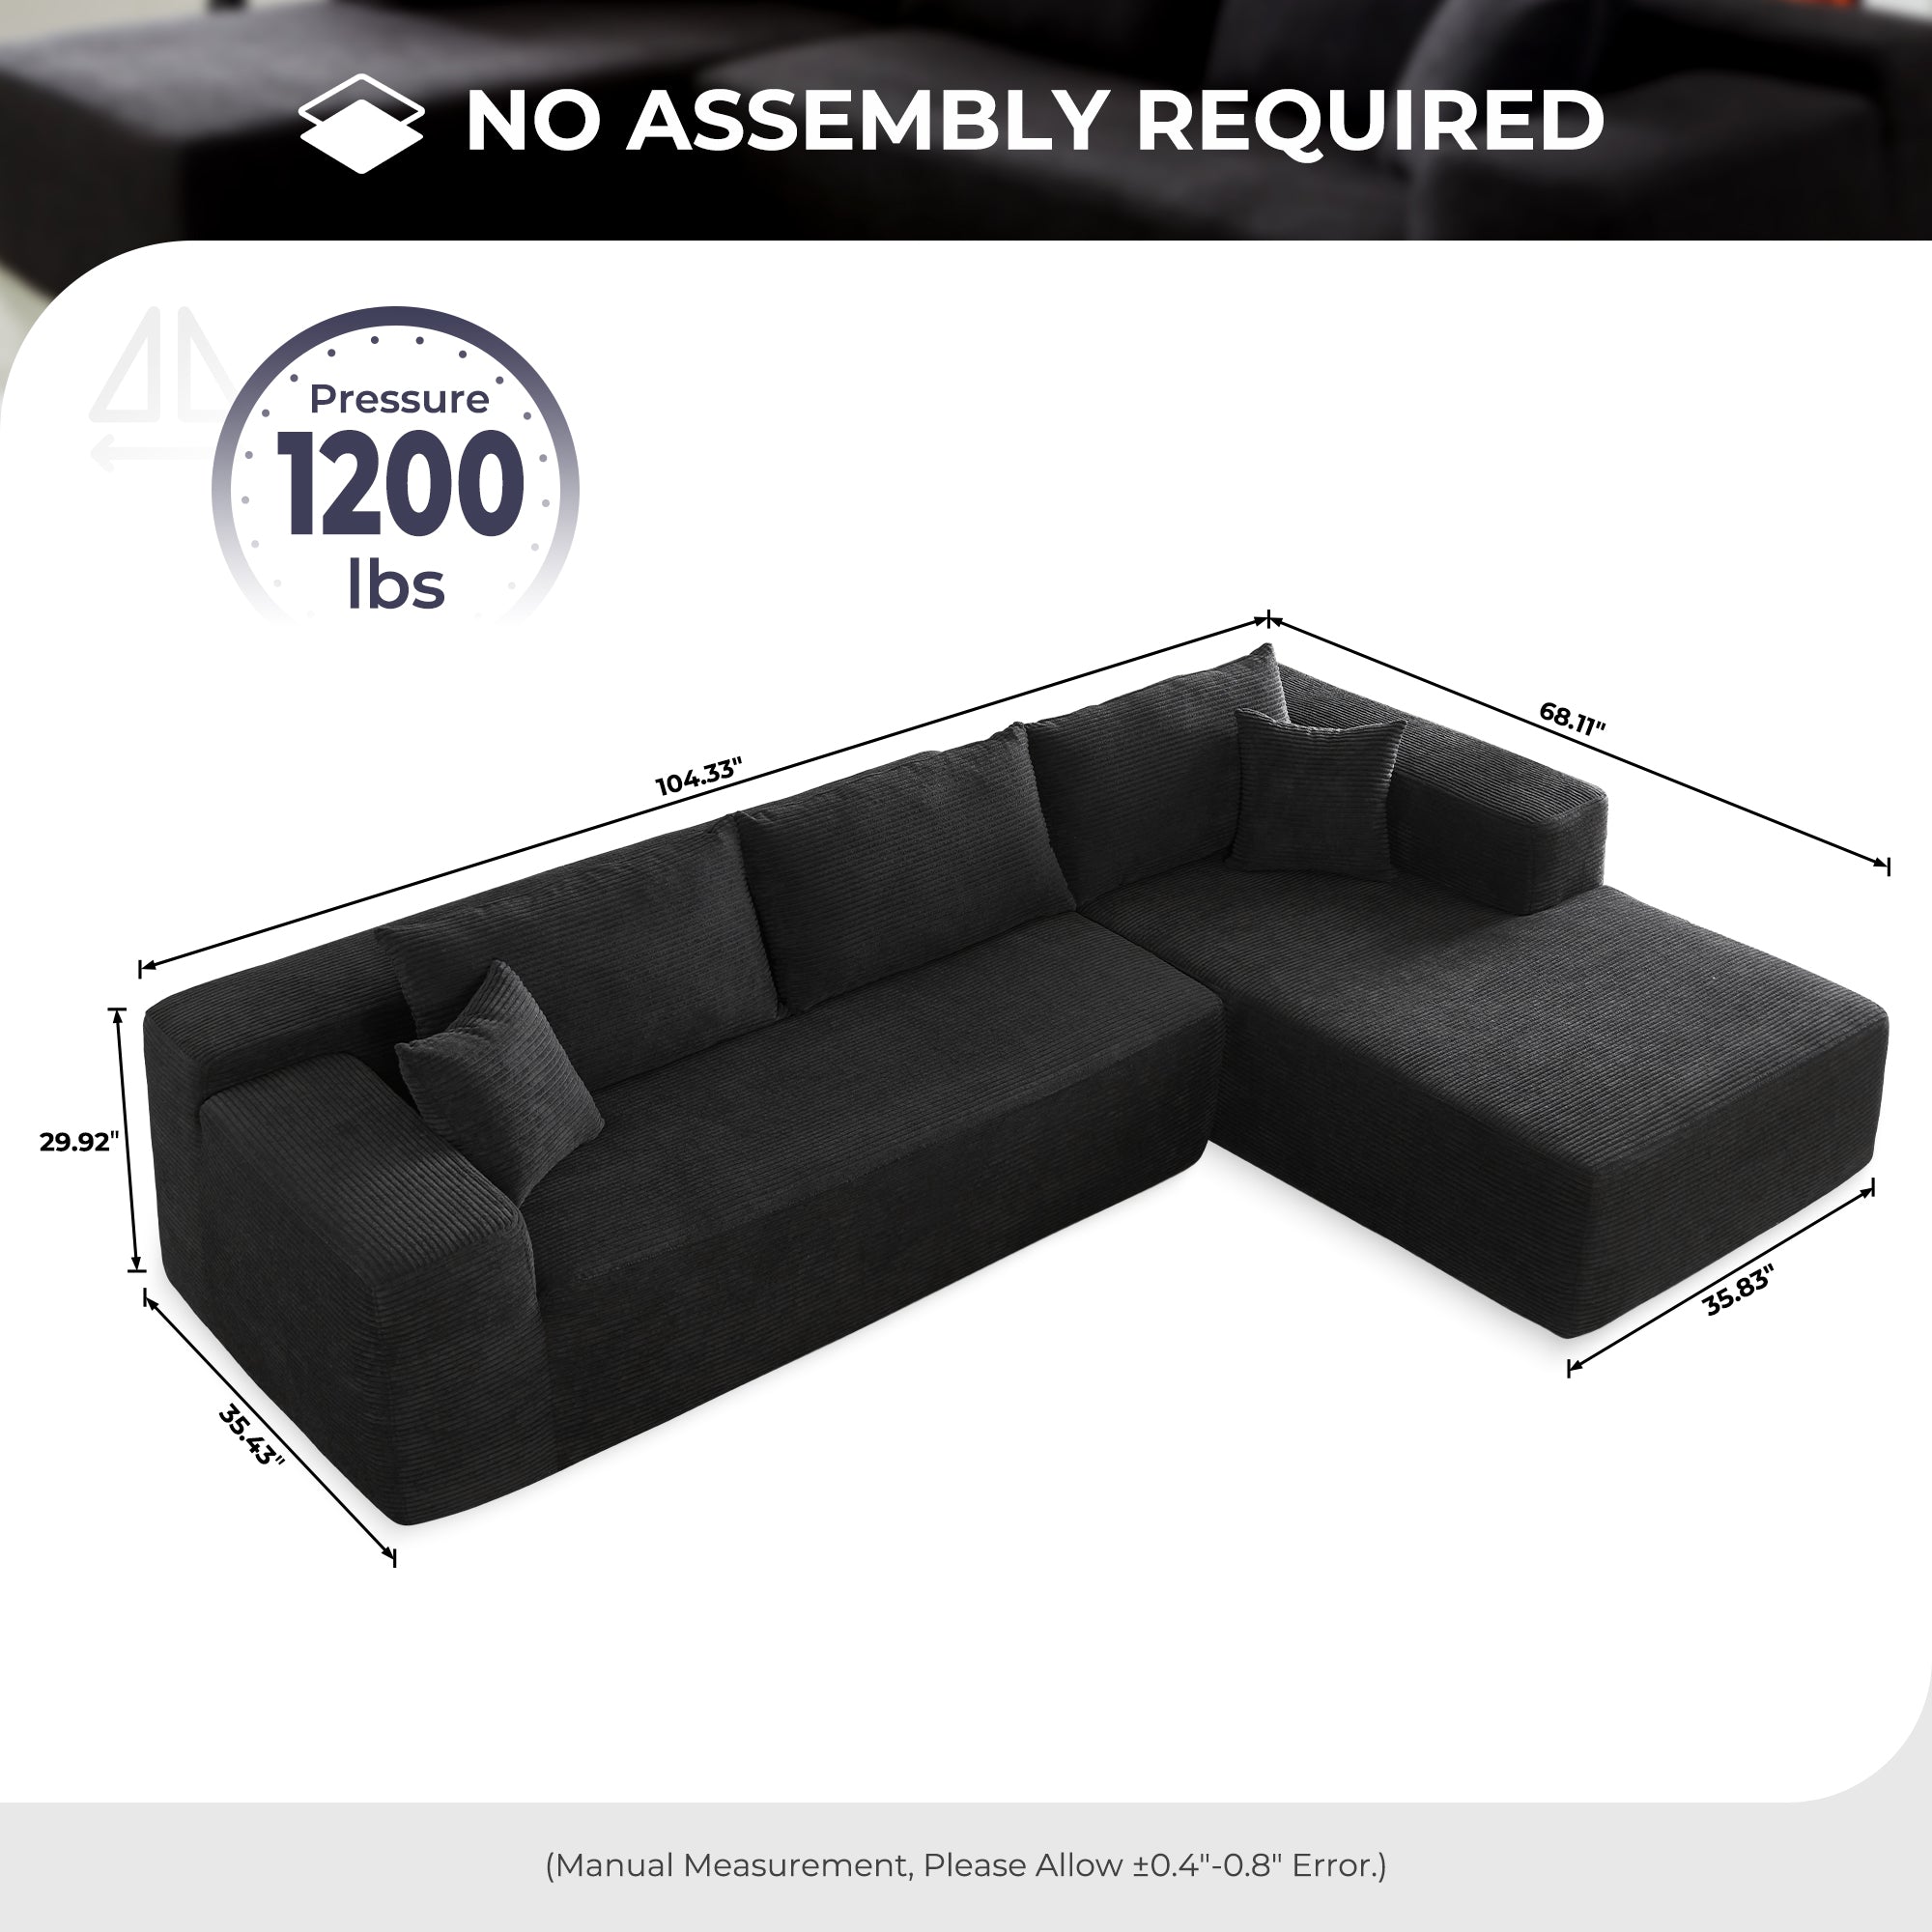 Ovios 104" L-Shape Modular Couch with Chaise,Corduroy Fabric,No Assembly Required